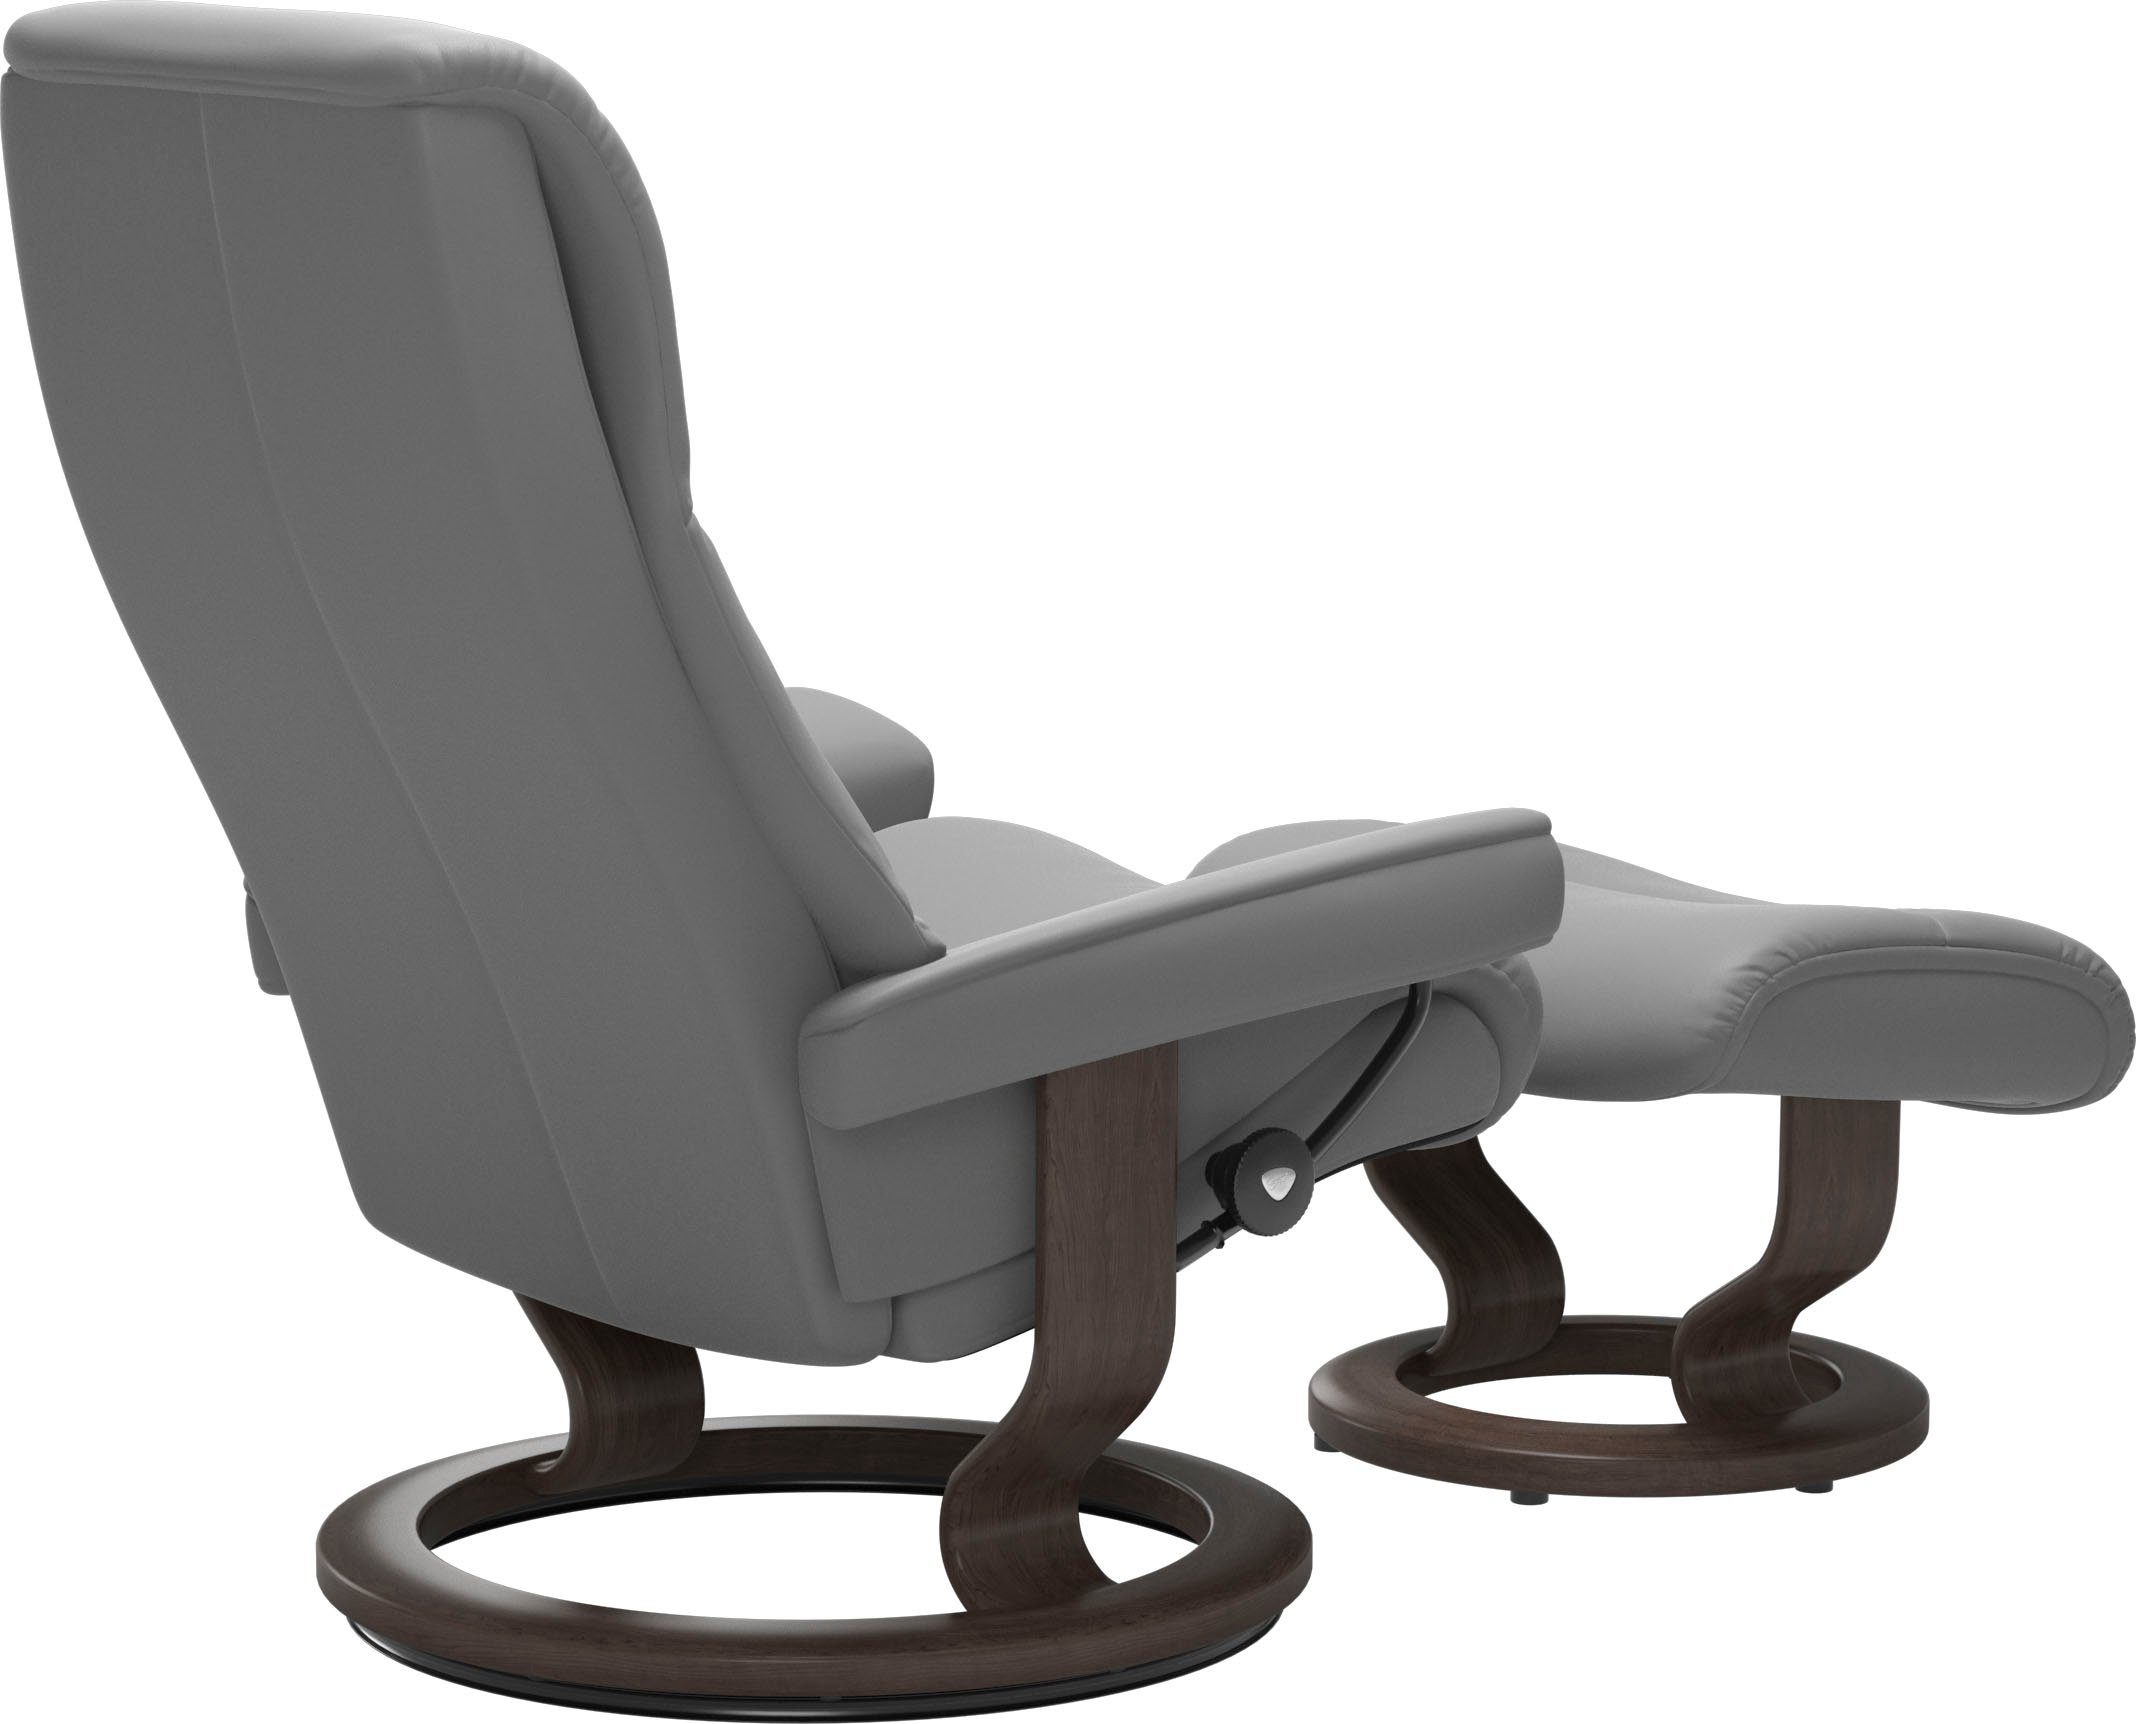 mit View, L,Gestell Wenge Base, Stressless® Größe Relaxsessel Classic